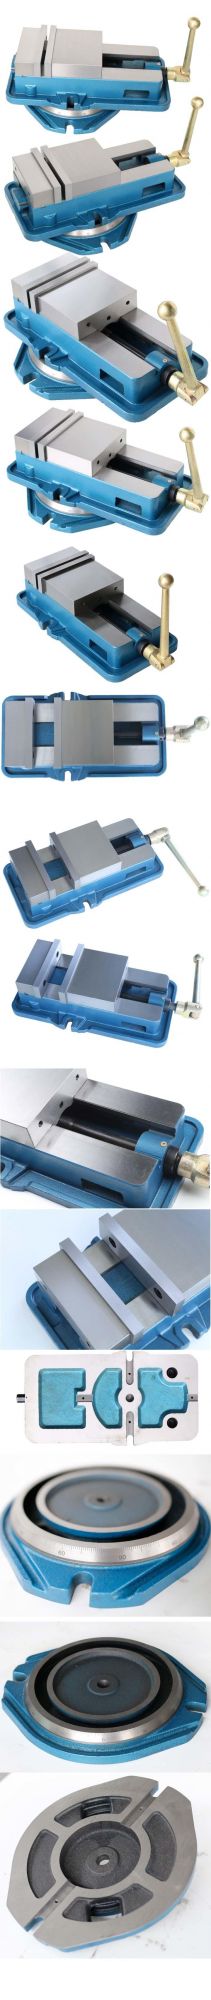 CNC Vise for Drilling Machine